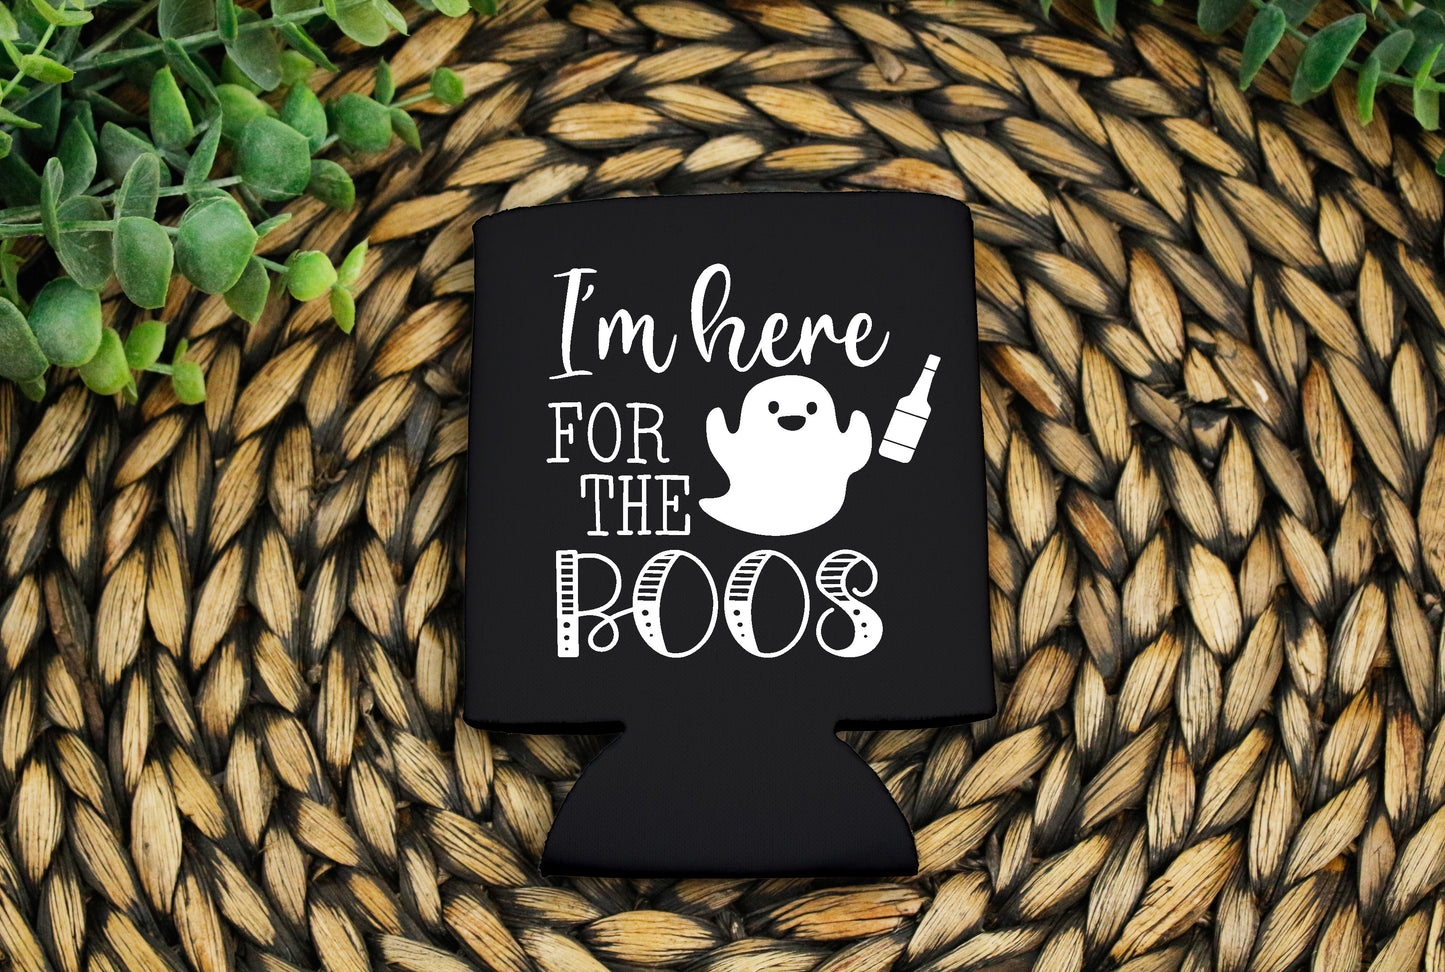 I'm here for the boos Koozie pocket size